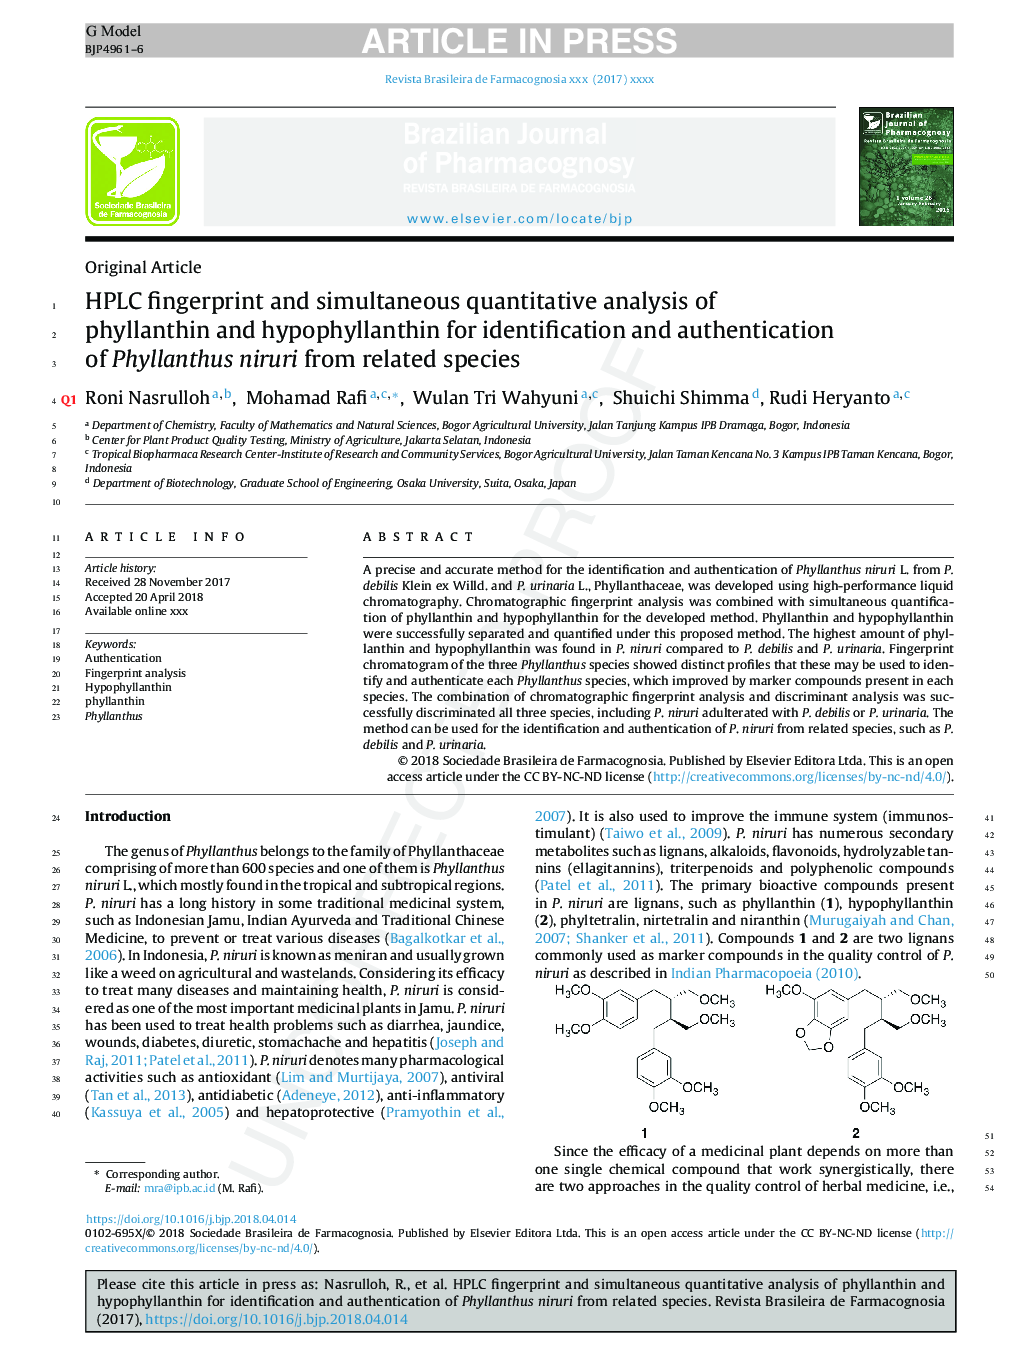 HPLC fingerprint and simultaneous quantitative analysis of phyllanthin and hypophyllanthin for identification and authentication of Phyllanthus niruri from related species